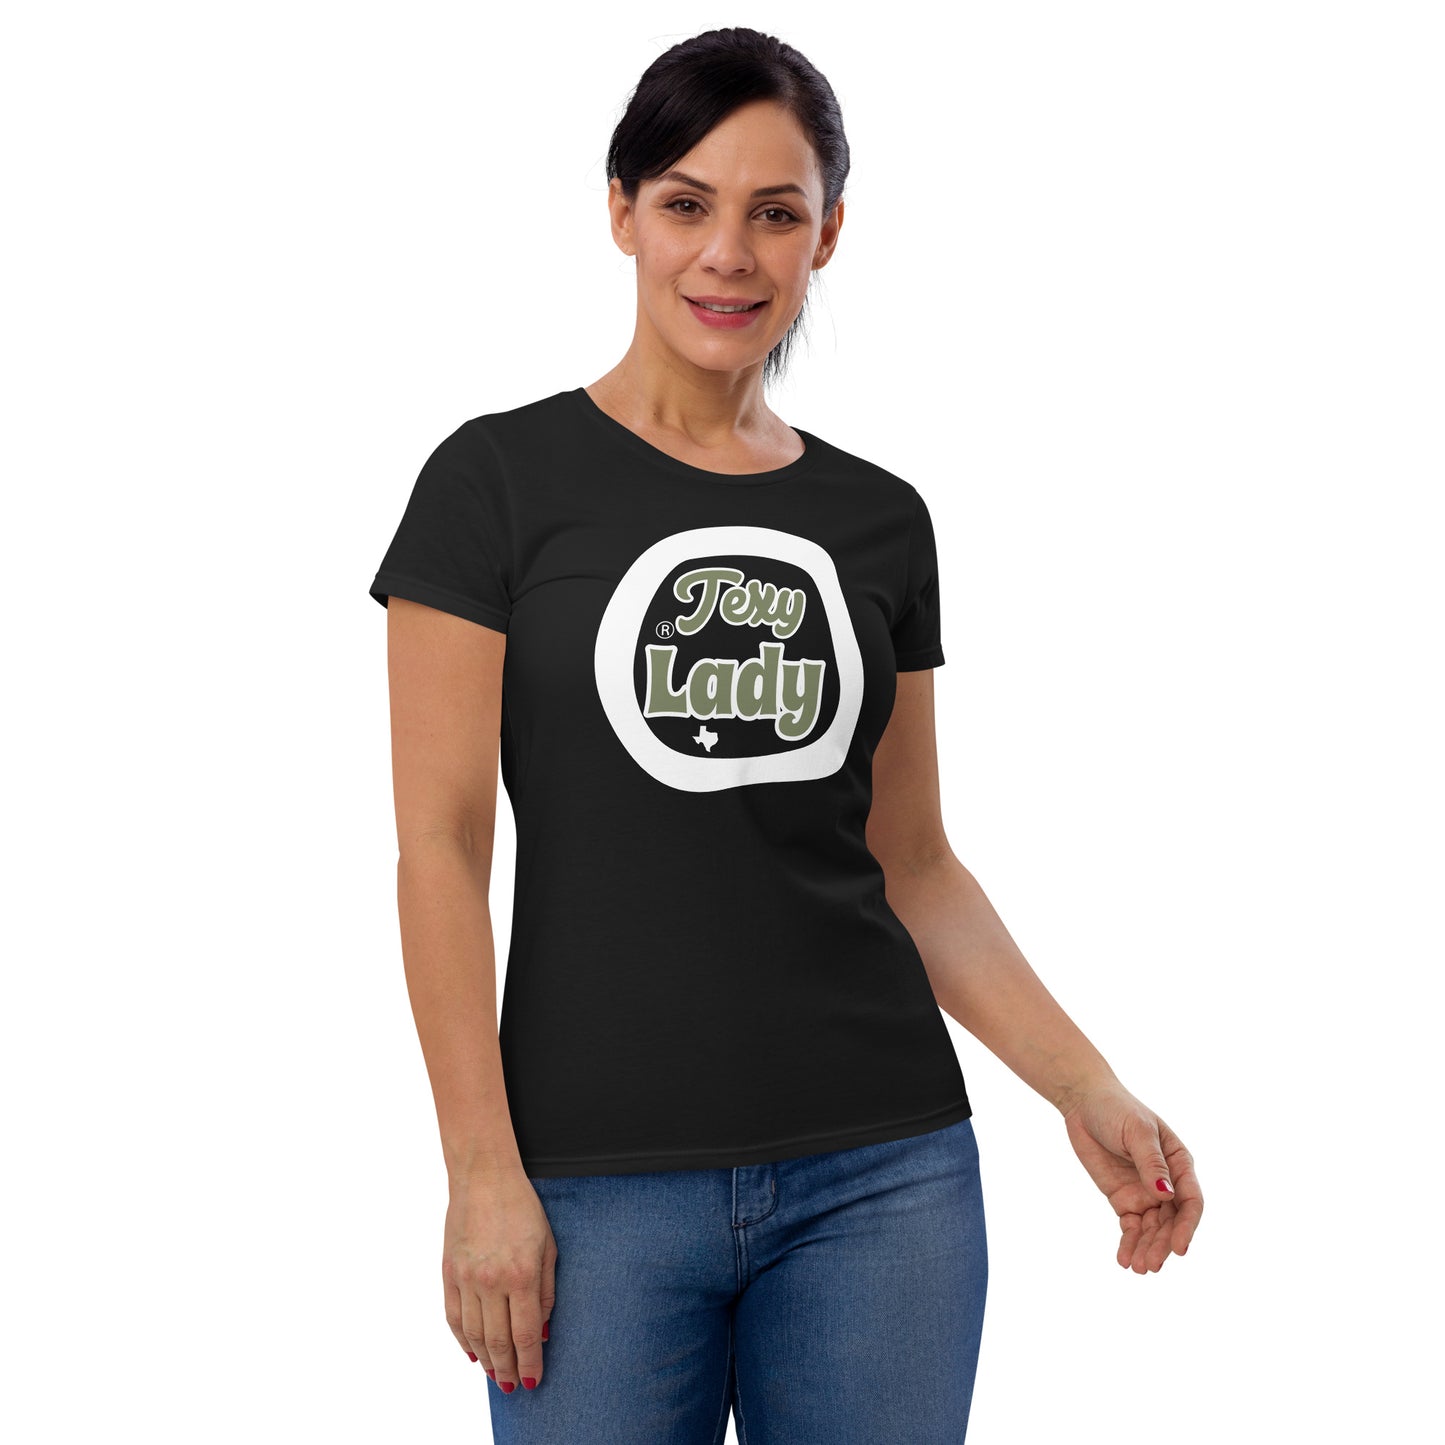 Women's Black Texy Lady Fitted T-Shirt